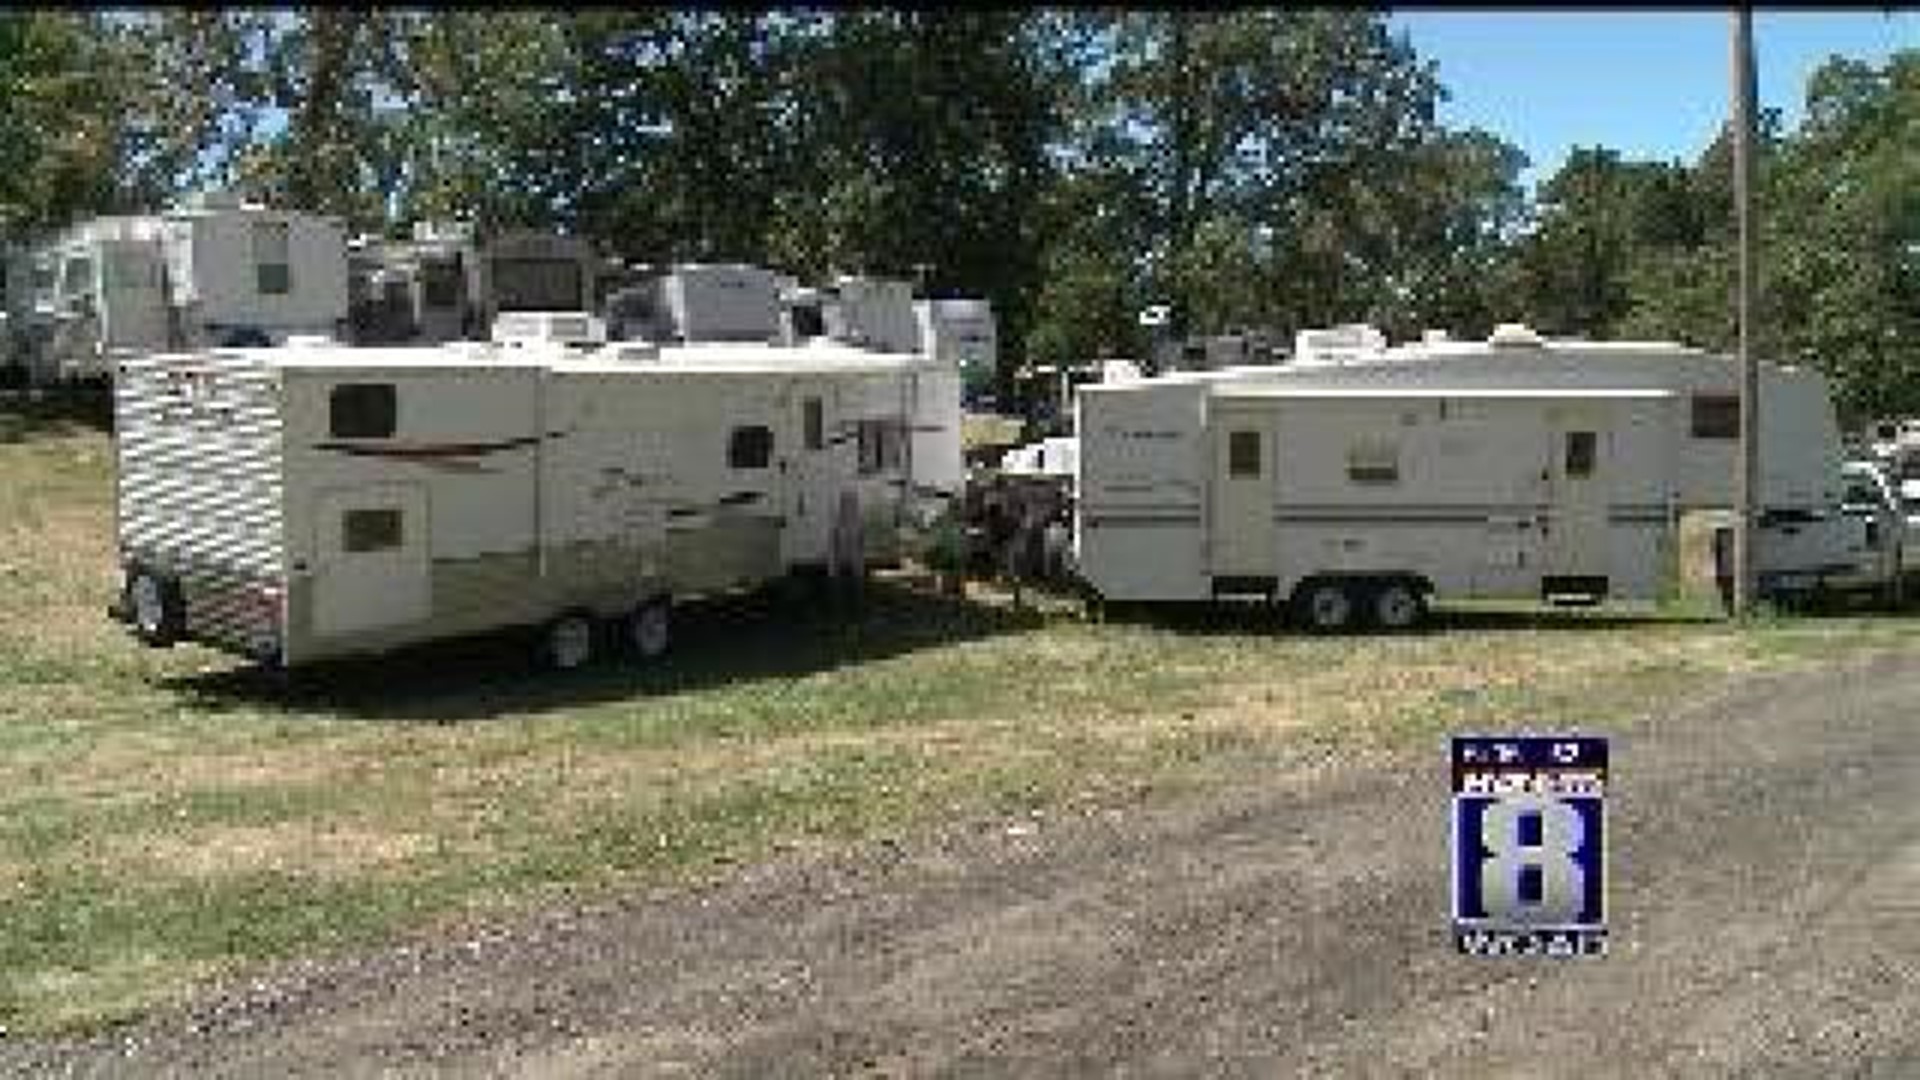 Competition for State Fair campsites